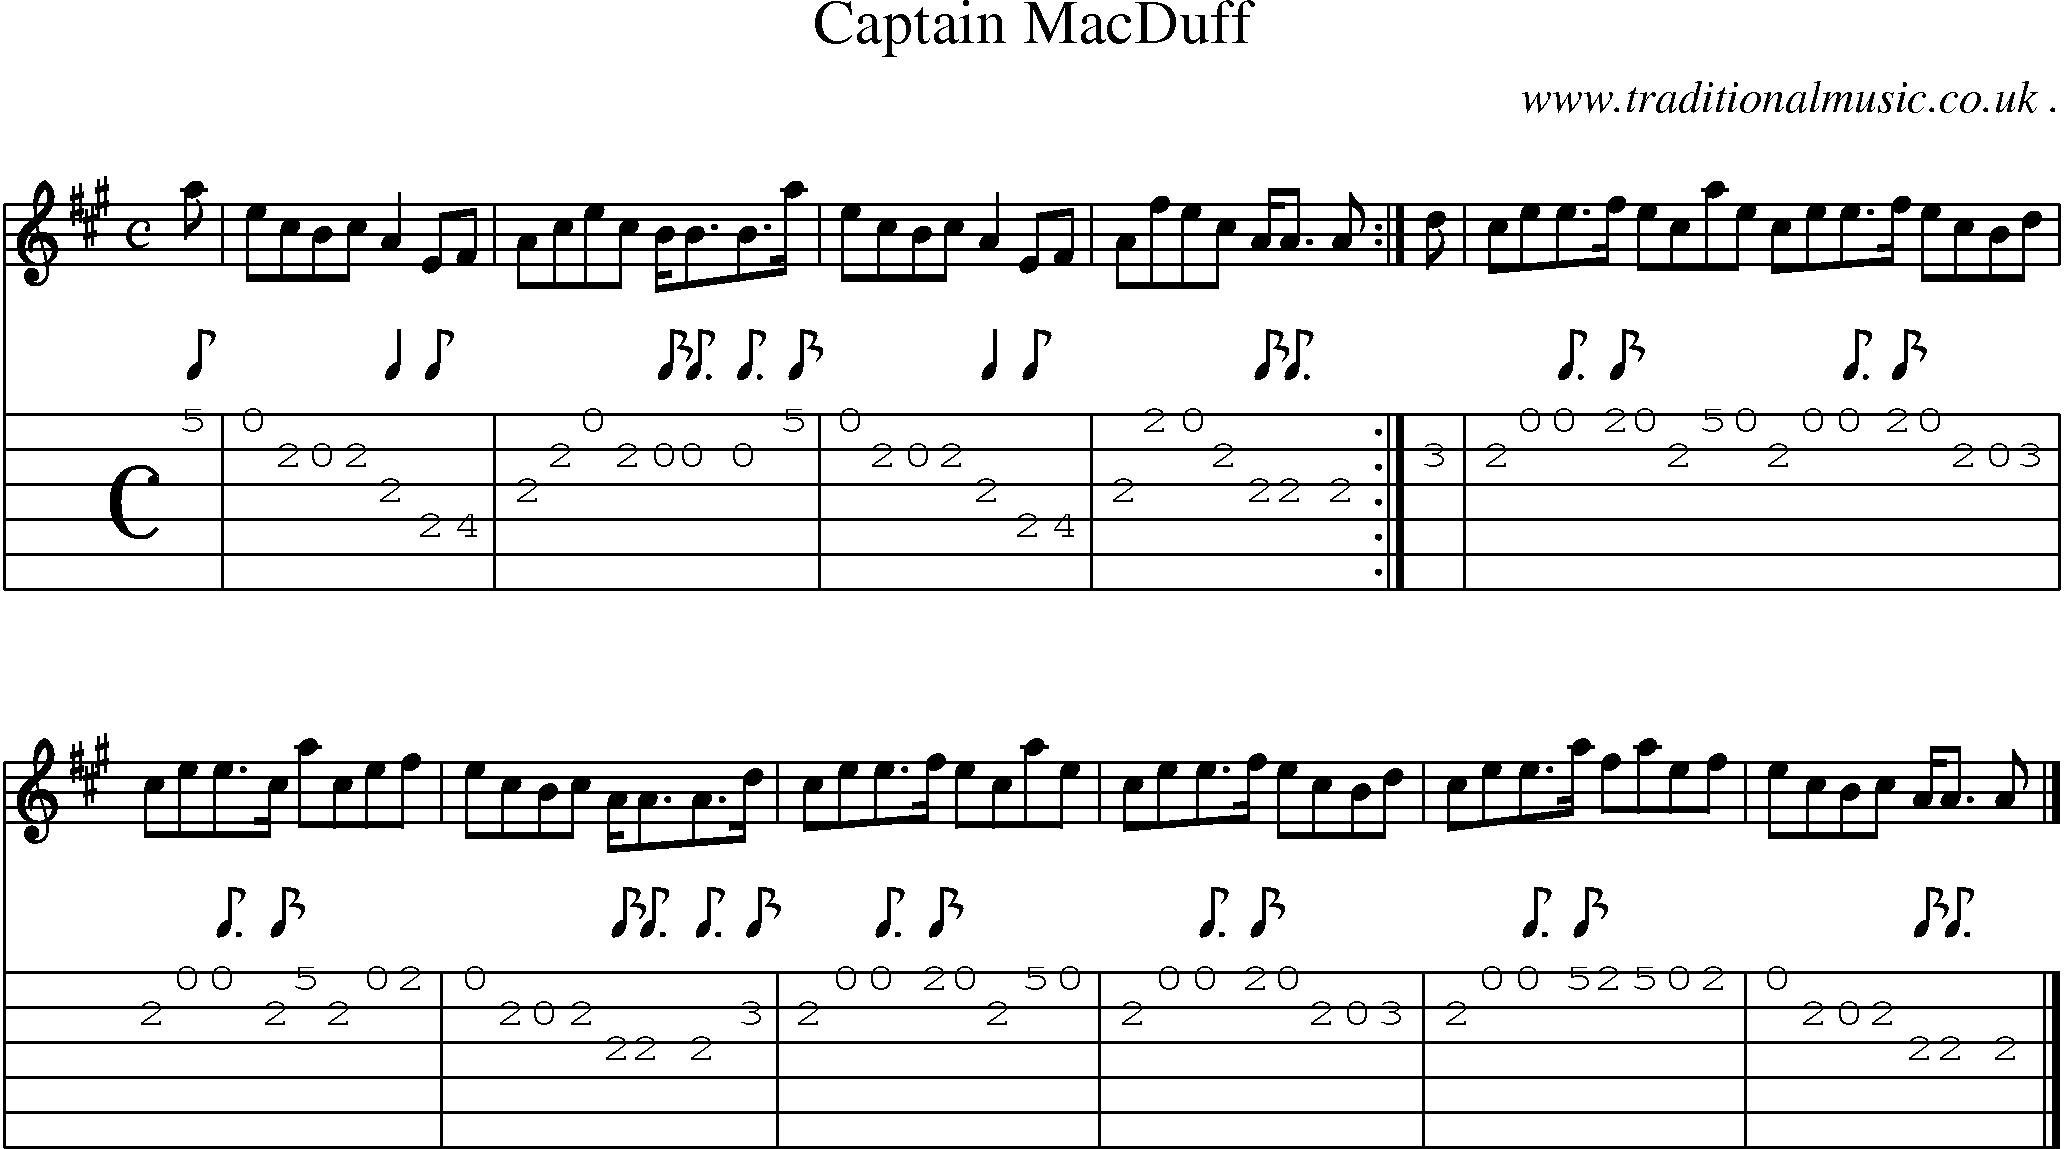 Sheet-music  score, Chords and Guitar Tabs for Captain Macduff